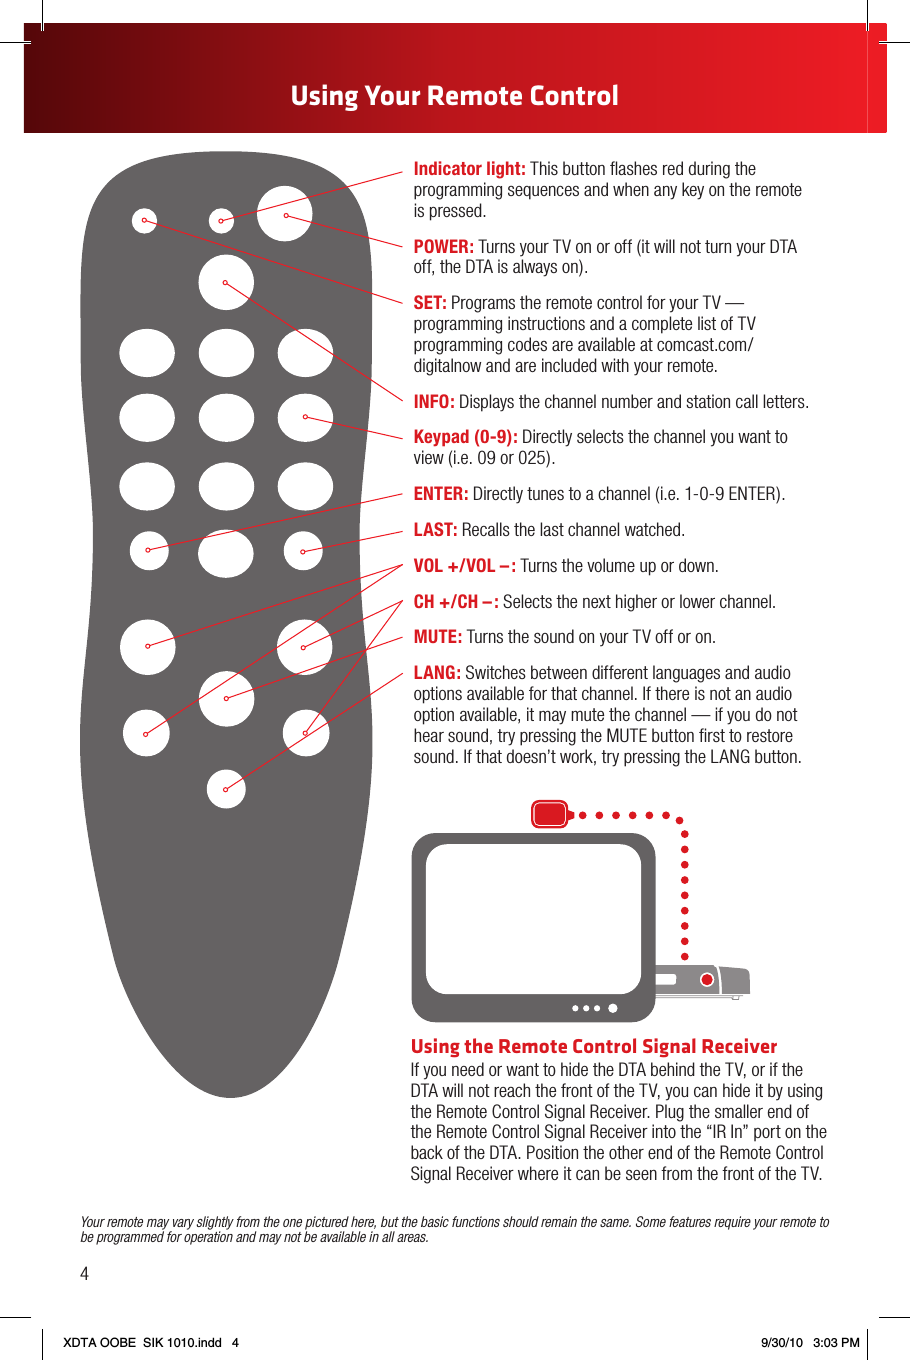 Your remote may vary slightly from the one pictured here, but the basic functions should remain the same. Some features require your remote to be programmed for operation and may not be available in all areas.  Indicator light: This button ﬂashes red during the programming sequences and when any key on the remote is pressed.POWER: Turns your TV on or off (it will not turn your DTA off, the DTA is always on).SET: Programs the remote control for your TV — programming instructions and a complete list of TV programming codes are available at comcast.com/digitalnow and are included with your remote.INFO: Displays the channel number and station call letters.Keypad (0-9): Directly selects the channel you want to view (i.e. 09 or 025).ENTER: Directly tunes to a channel (i.e. 1-0-9 ENTER).LAST: Recalls the last channel watched.VOL +/VOL – : Turns the volume up or down.CH +/CH – : Selects the next higher or lower channel.MUTE: Turns the sound on your TV off or on.LANG: Switches between different languages and audio options available for that channel. If there is not an audio option available, it may mute the channel — if you do not hear sound, try pressing the MUTE button ﬁrst to restore sound. If that doesn’t work, try pressing the LANG button.   Using the Remote Control Signal ReceiverIf you need or want to hide the DTA behind the TV, or if the DTA will not reach the front of the TV, you can hide it by using the Remote Control Signal Receiver. Plug the smaller end of the Remote Control Signal Receiver into the “IR In” port on the back of the DTA. Position the other end of the Remote Control Signal Receiver where it can be seen from the front of the TV.4Using Your Remote ControlXDTA OOBE  SIK 1010.indd   4 9/30/10   3:03 PM